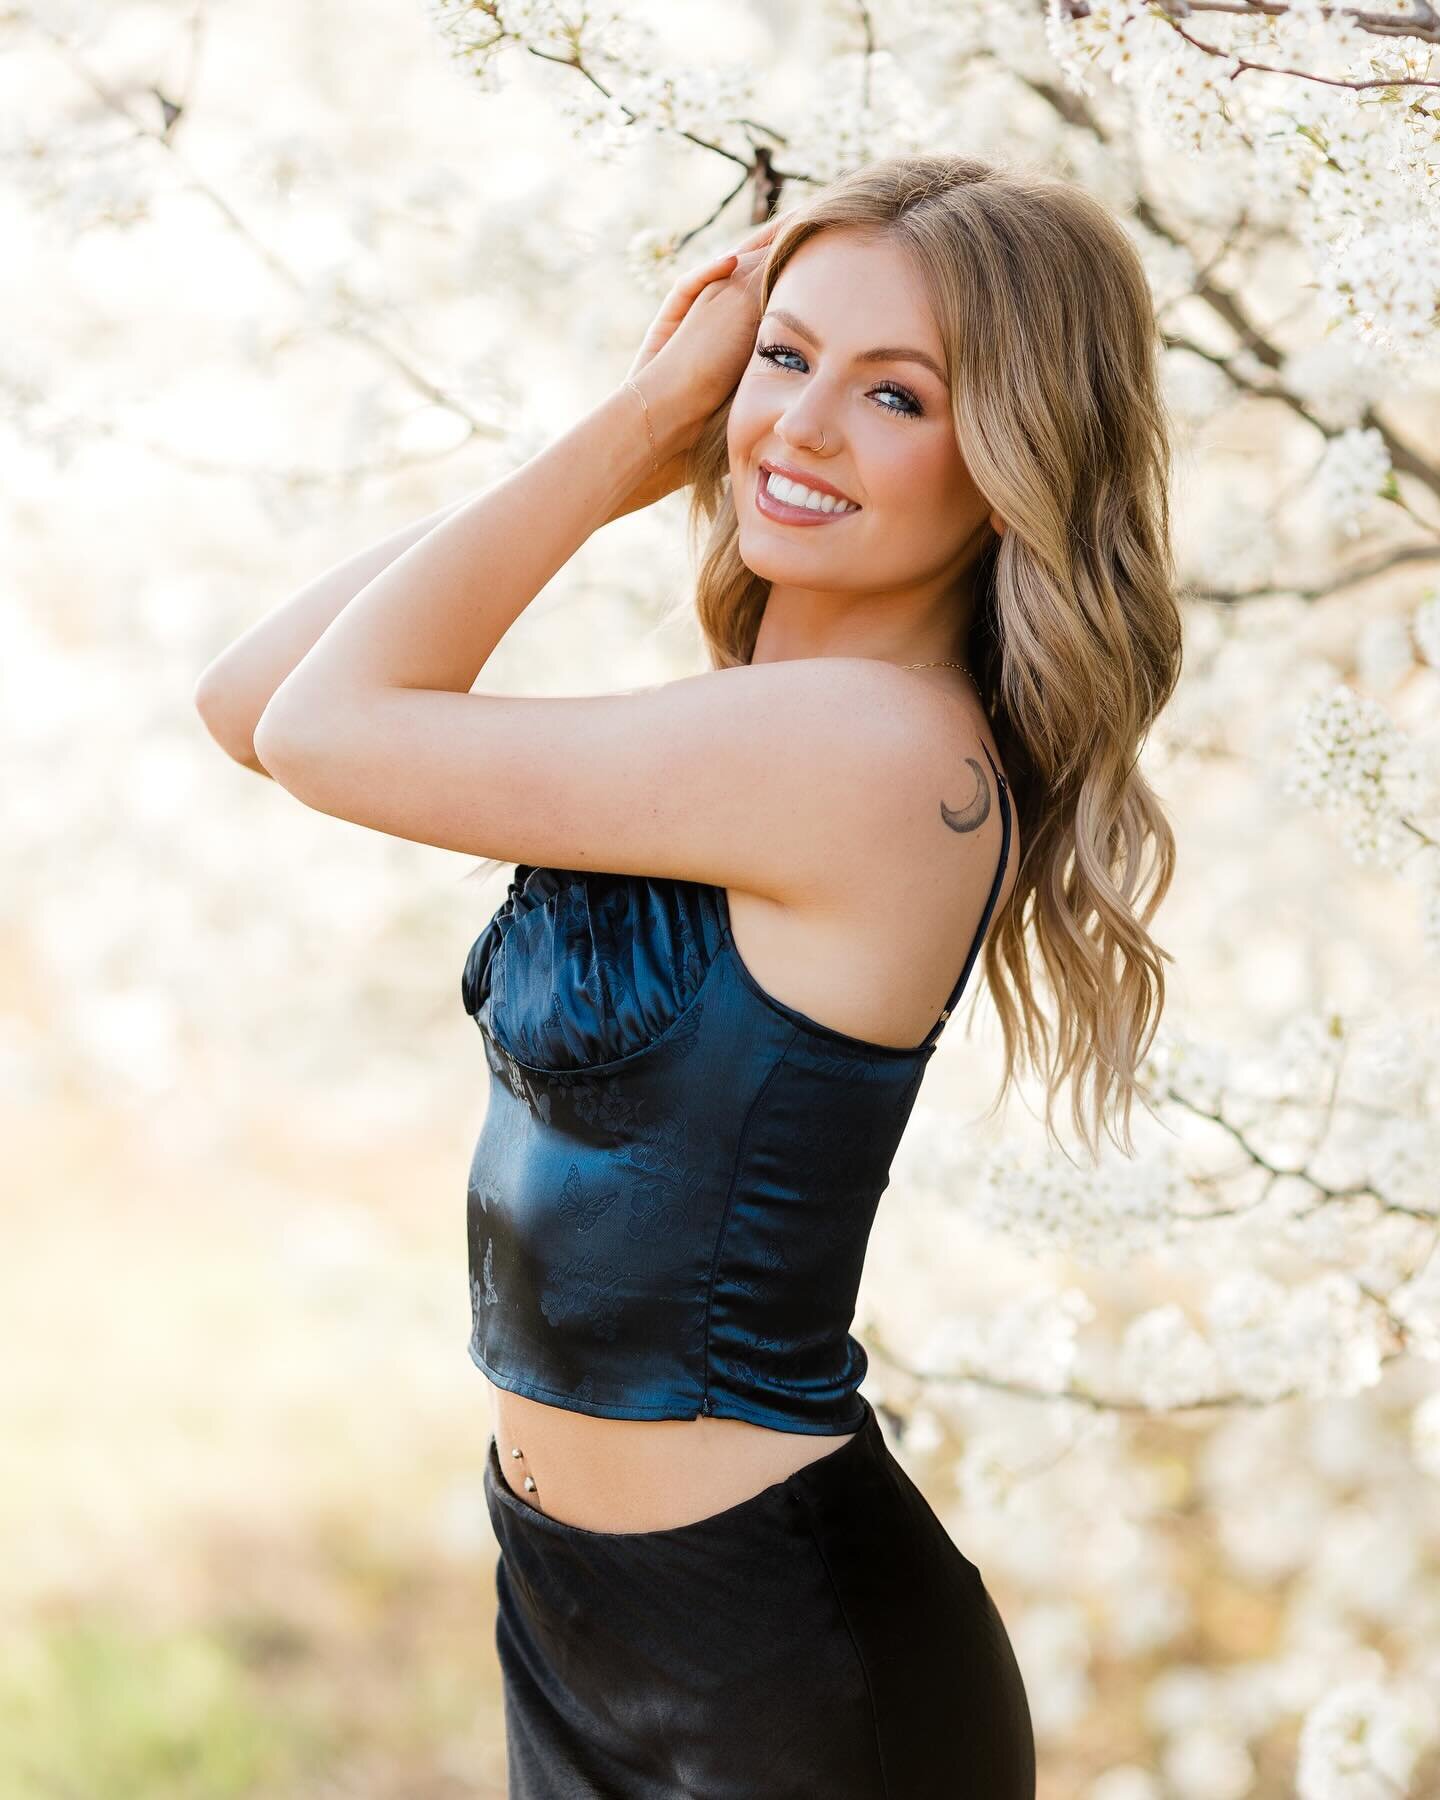 Spring sprung early this year and it made my March sessions 1000% better&hellip; 😍🤍 How gorgeous is @rylie.osmus !? 🌸

#nwaseniorphotographer #fayettevilleseniorphotographer #bentonvilleseniorphotographer #nwaphotographer #nwaportraitphotographer 